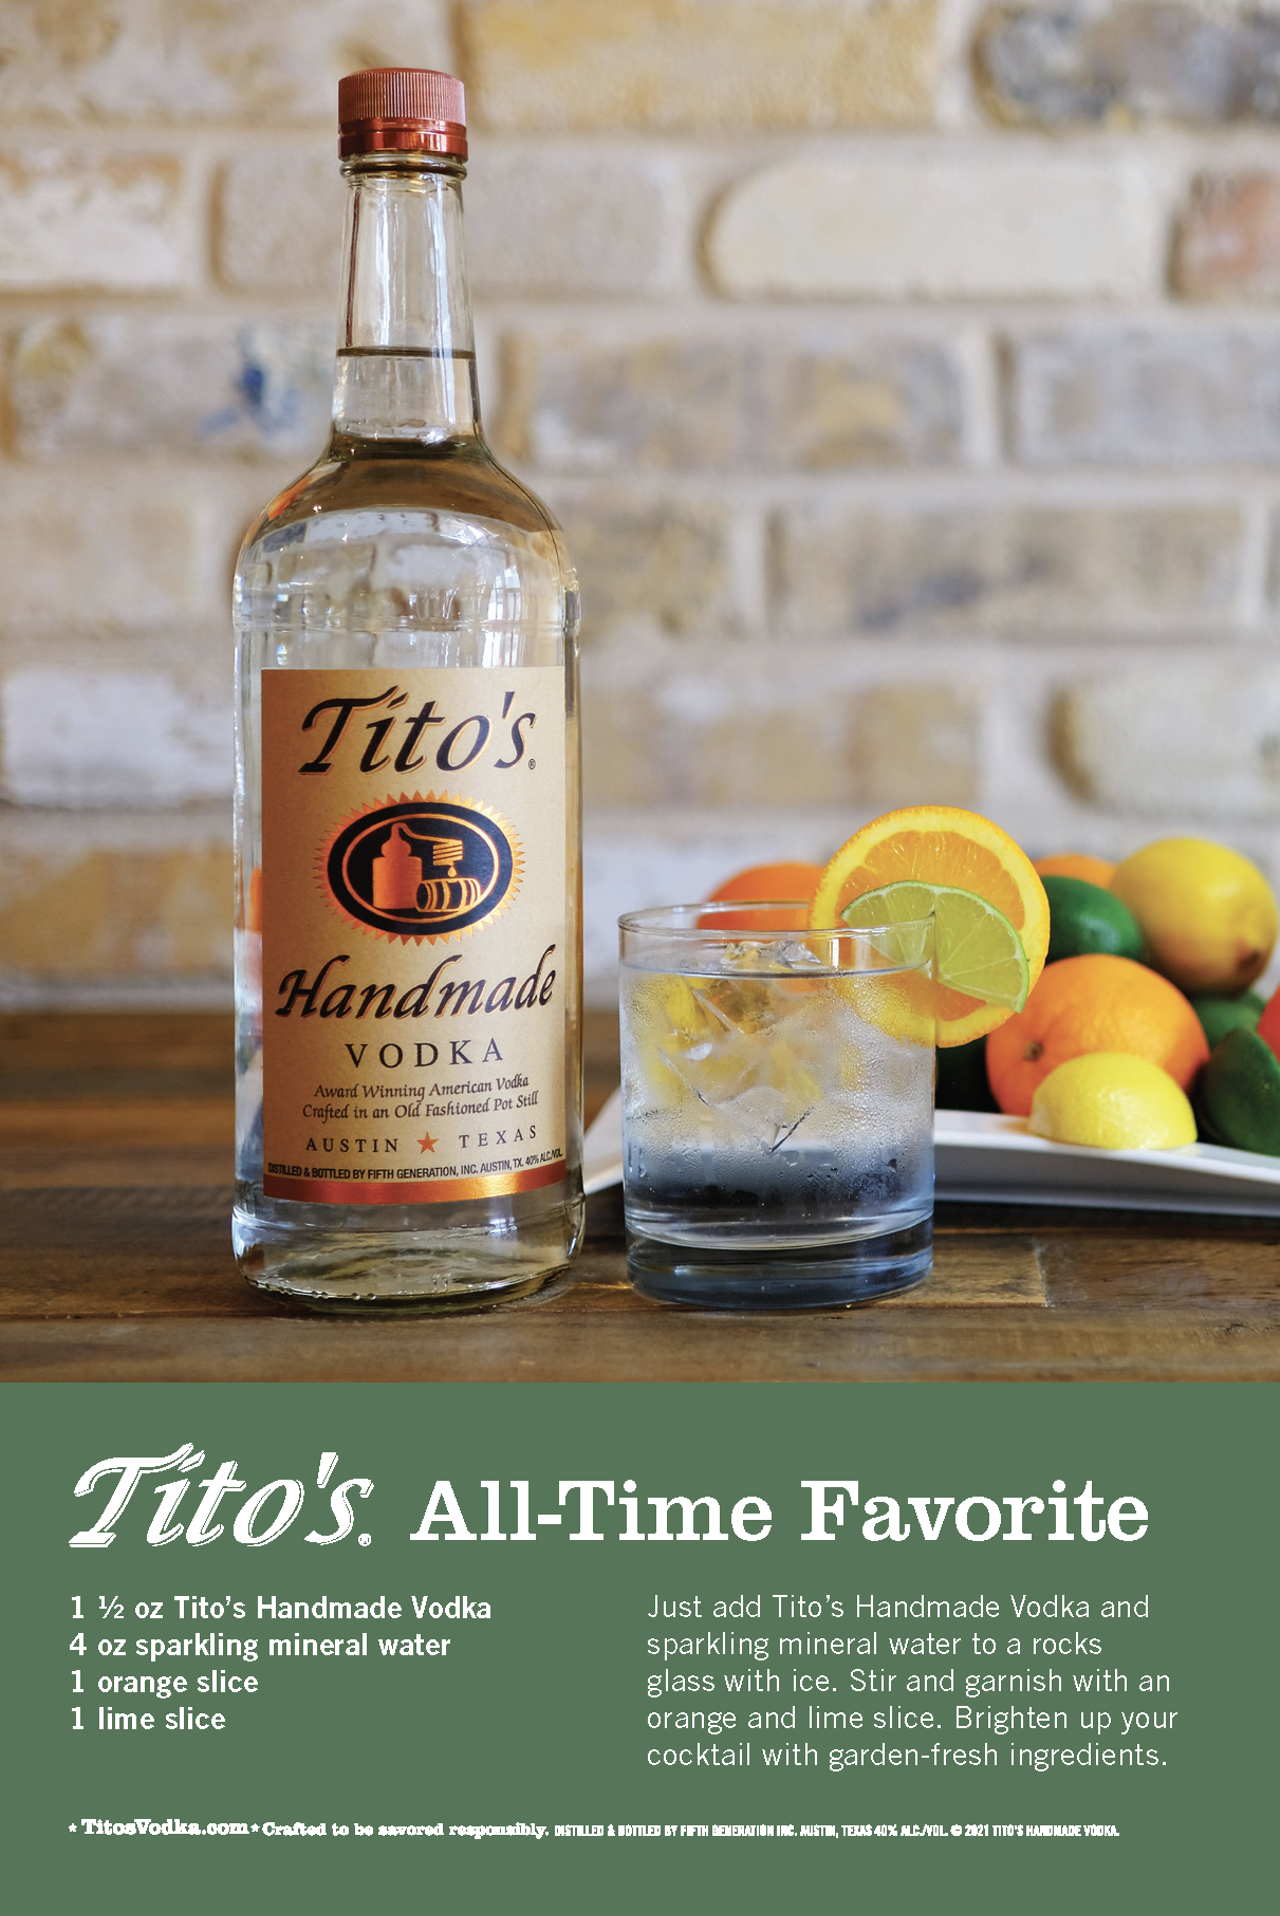 All-Time Favorite
Try more Tito's Handmade Vodka cocktails here!